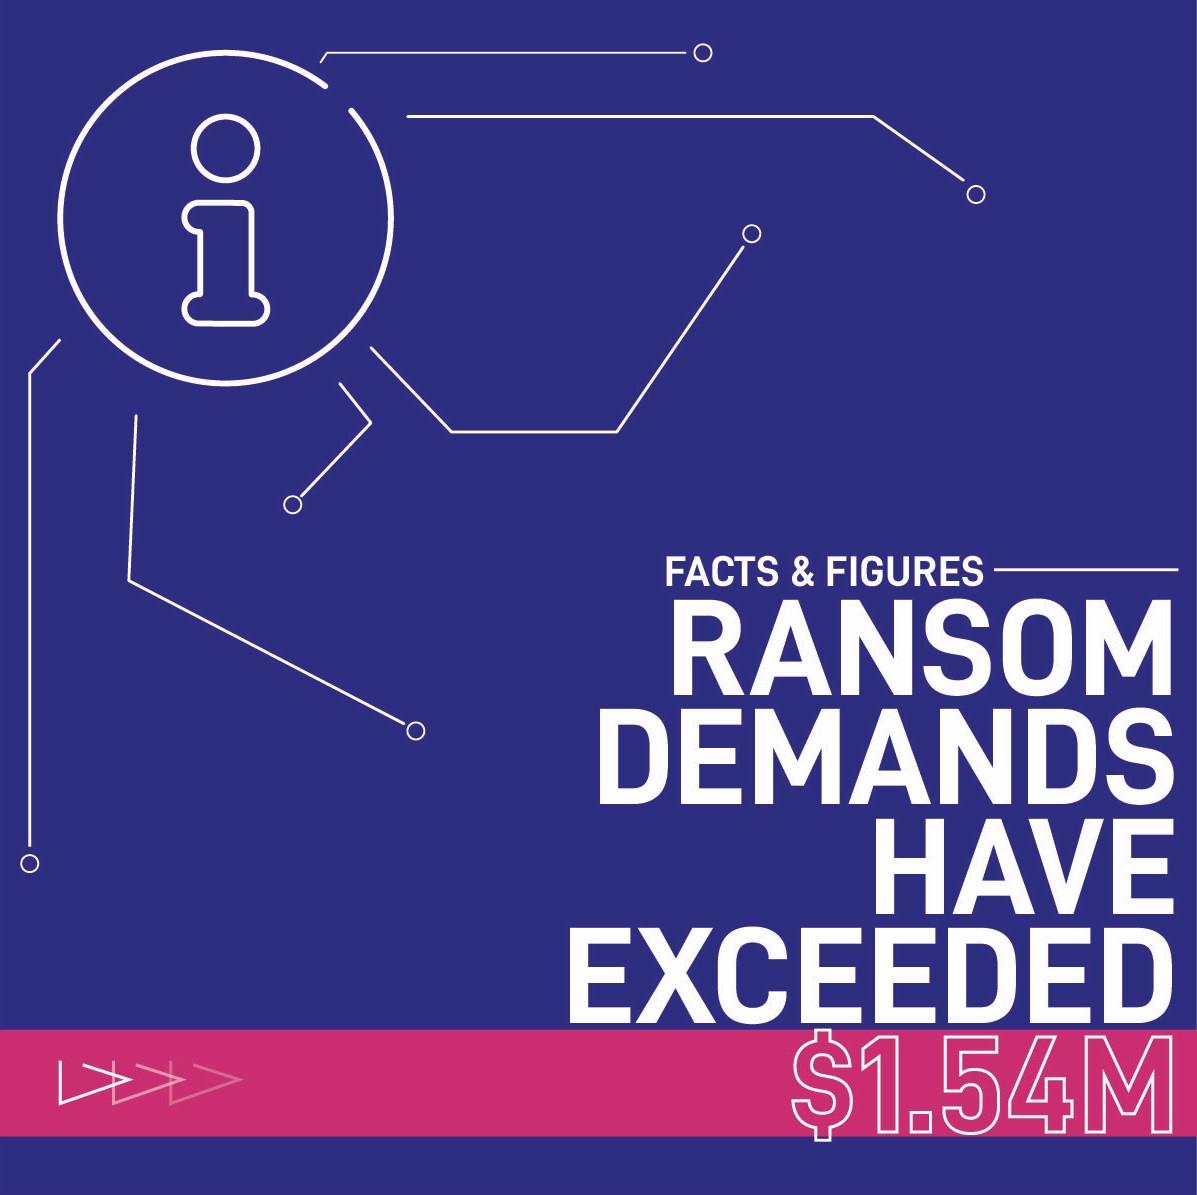 Ransomware costs up to $1.54 million. 